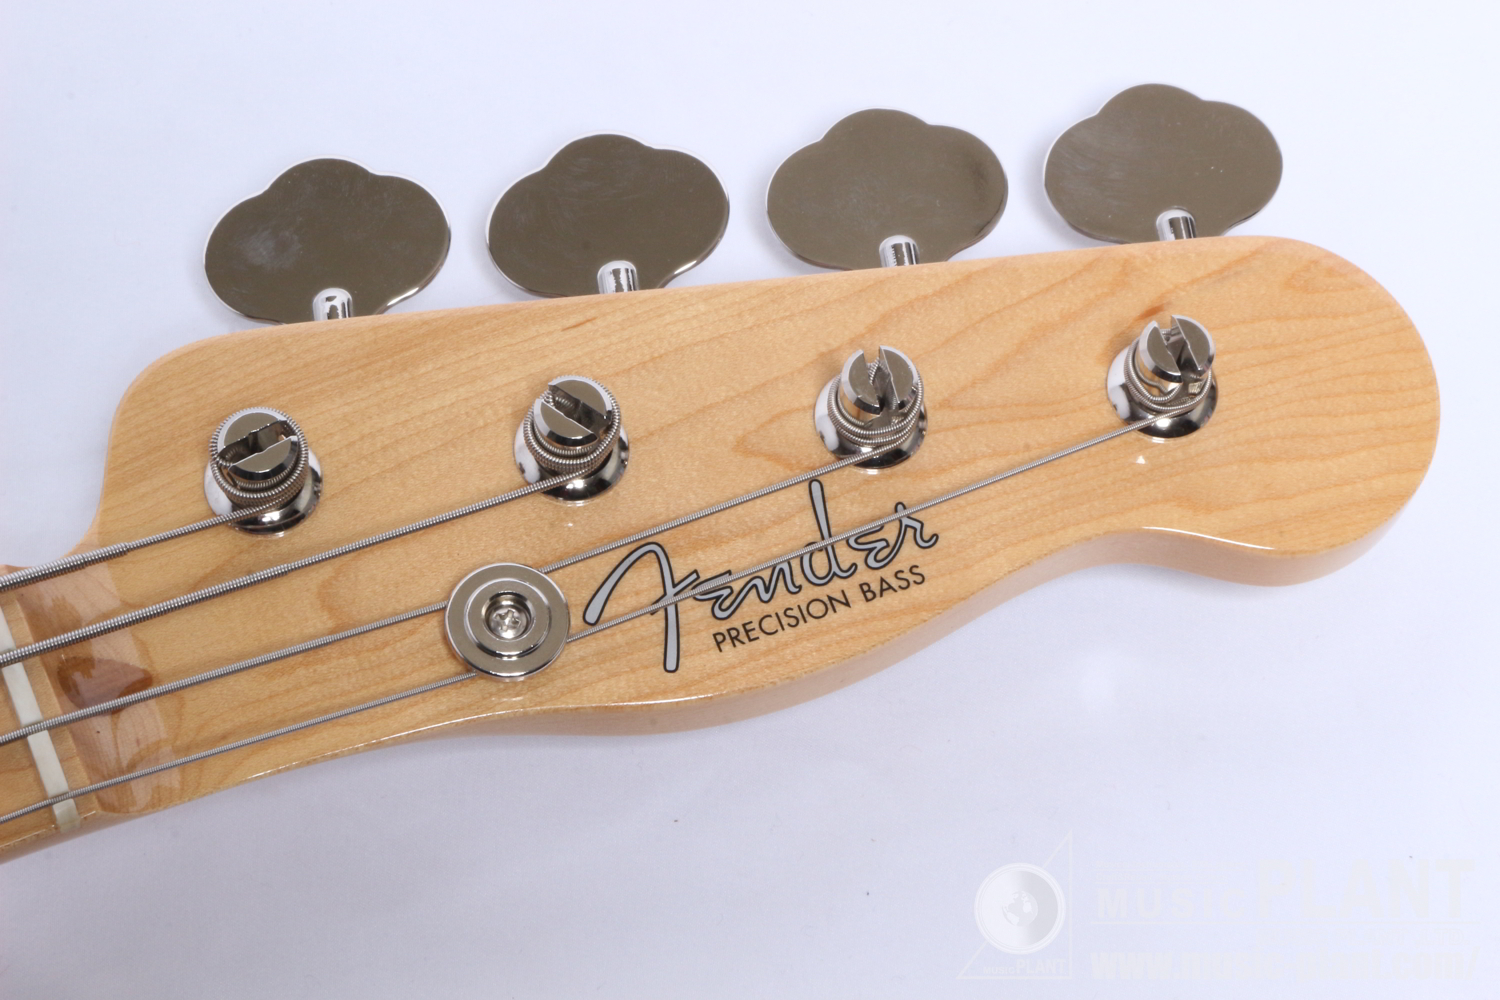 Made in Japan Traditional Original 50s Precision Bass, Maple Fingerboard, Butterscotch Blondeヘッド画像